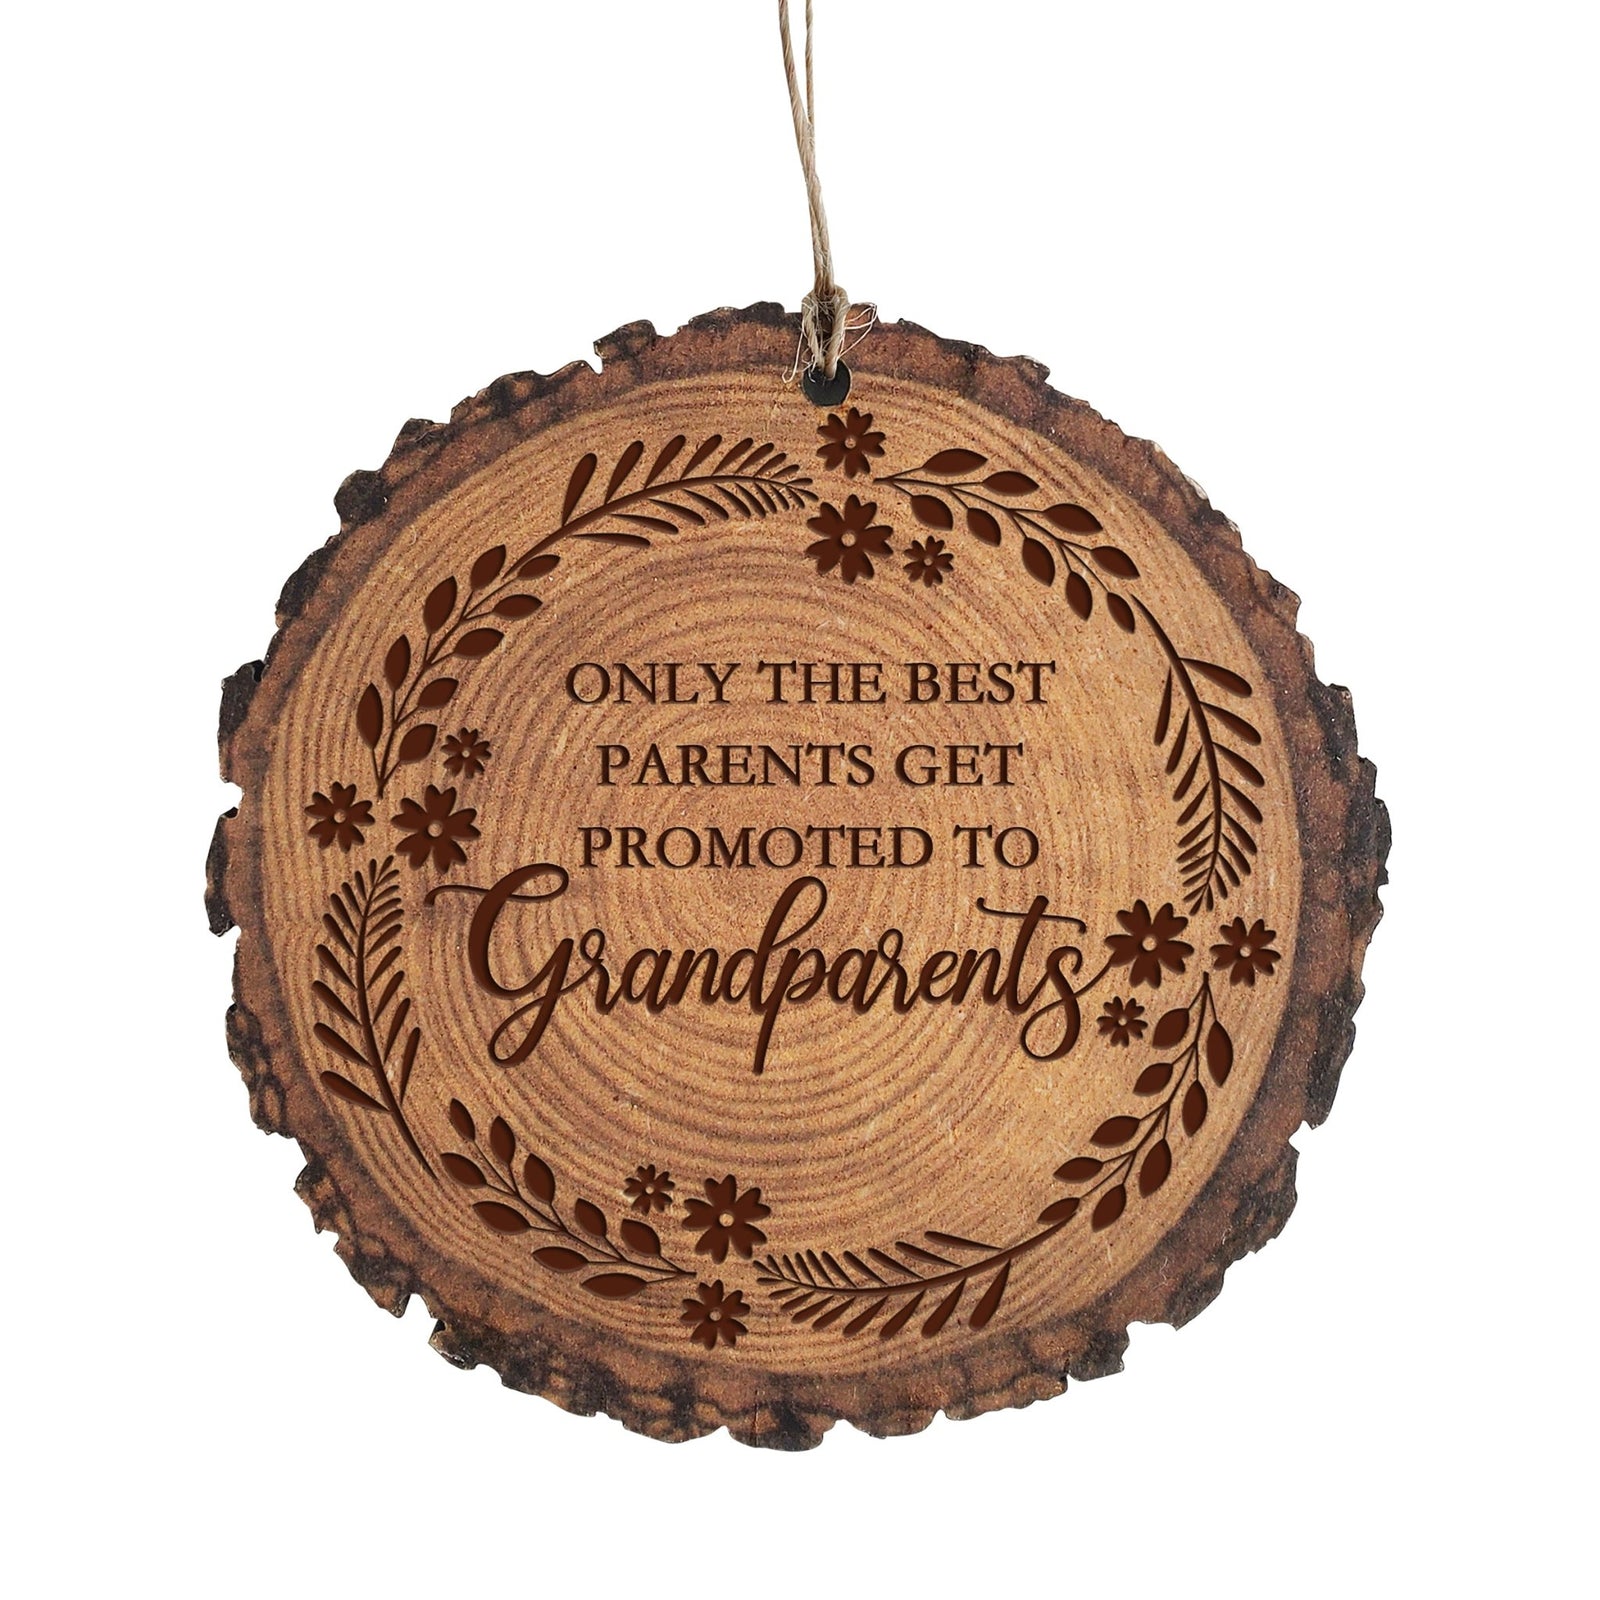 Inspiring 3.75in Christmas Barky Ornament for Grandparents - Only The Best Parents - LifeSong Milestones